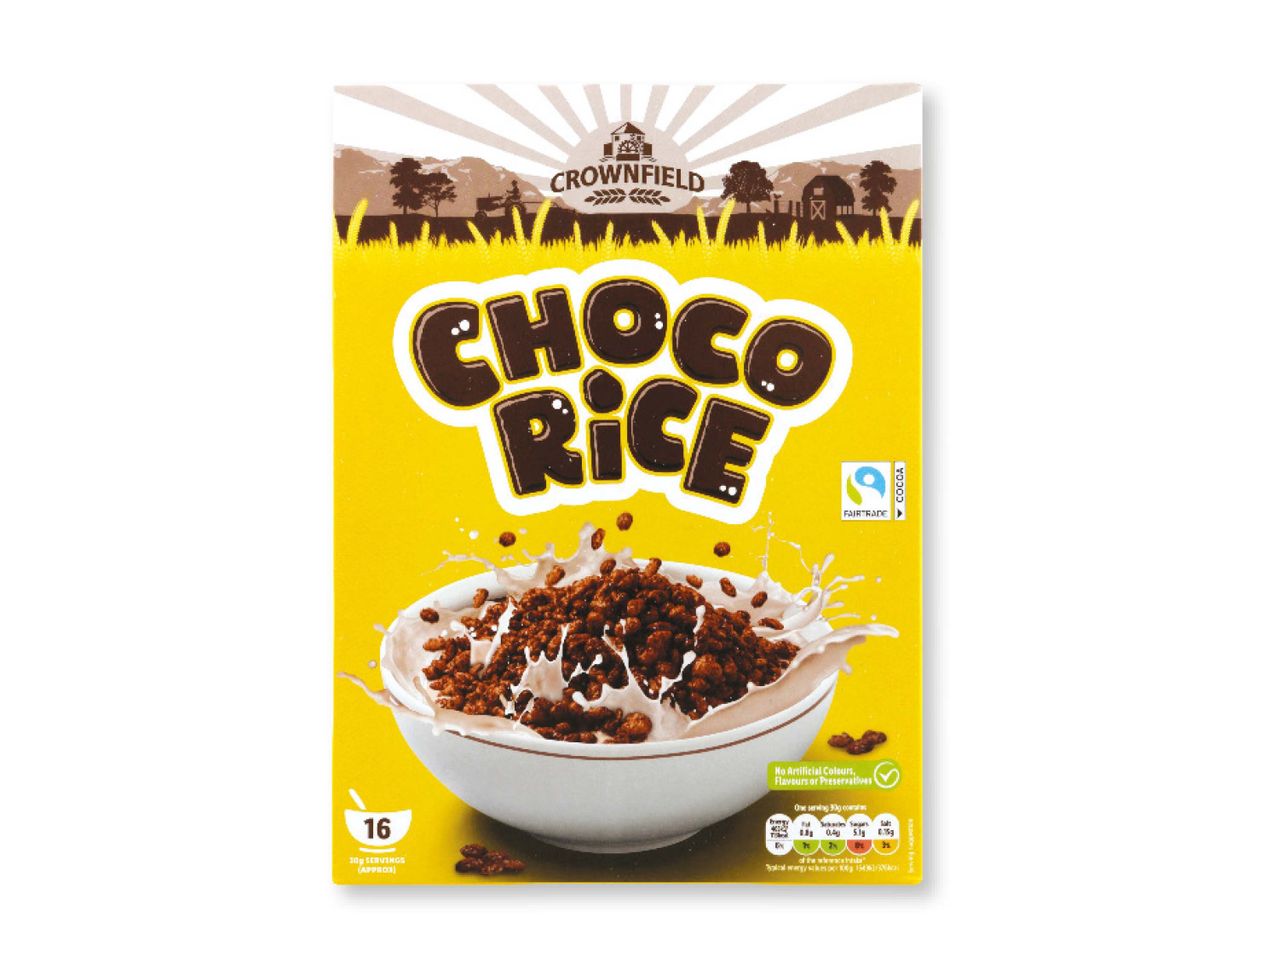 Go to full screen view: Crownfield CHOCO RICE - Image 1